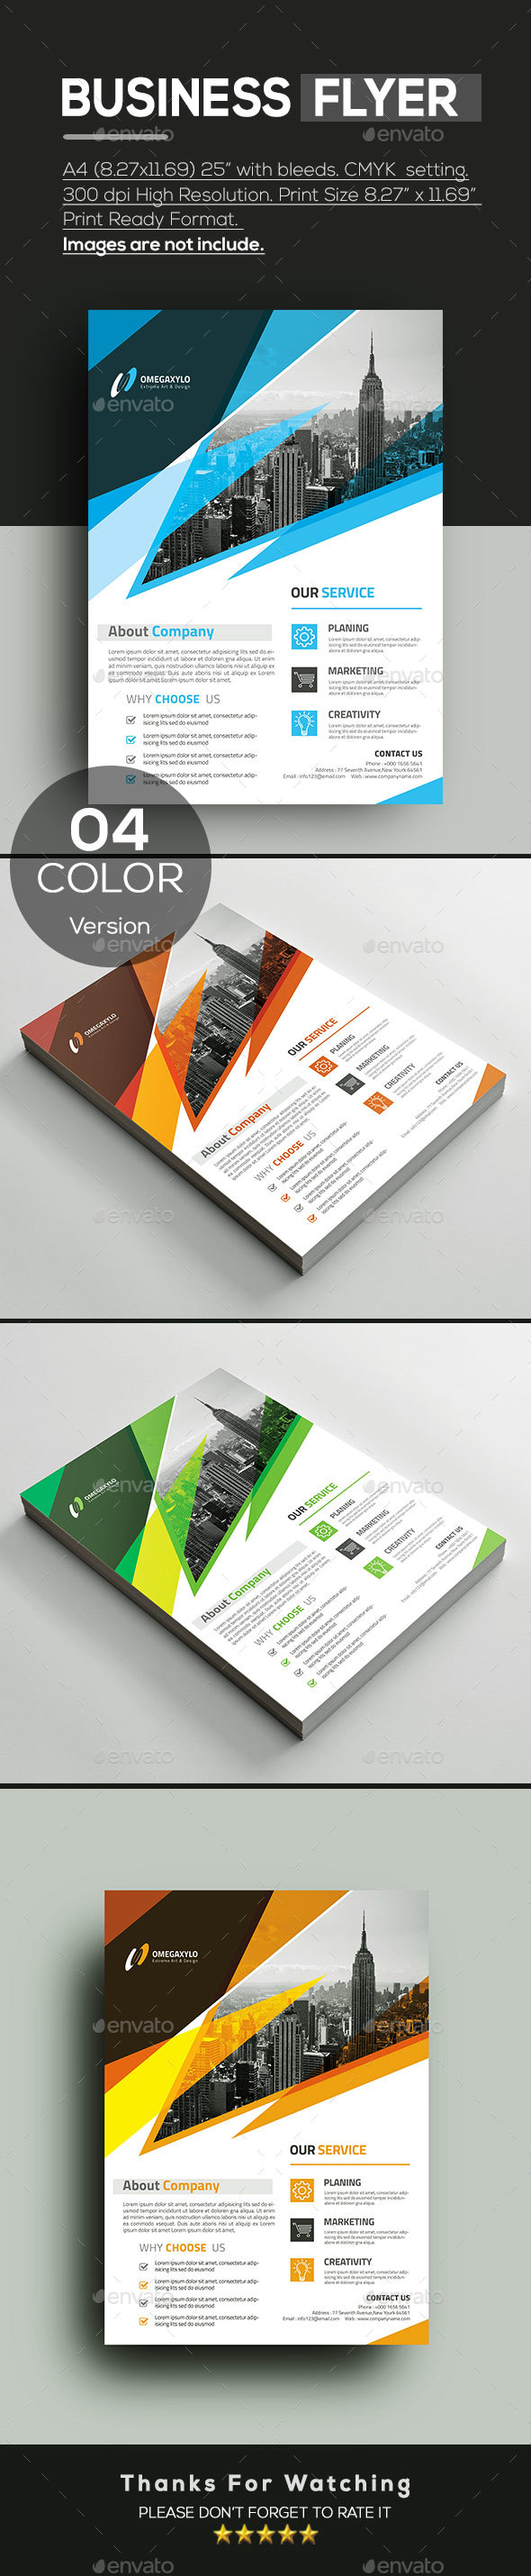 GraphicRiver Business Flyer 20873647